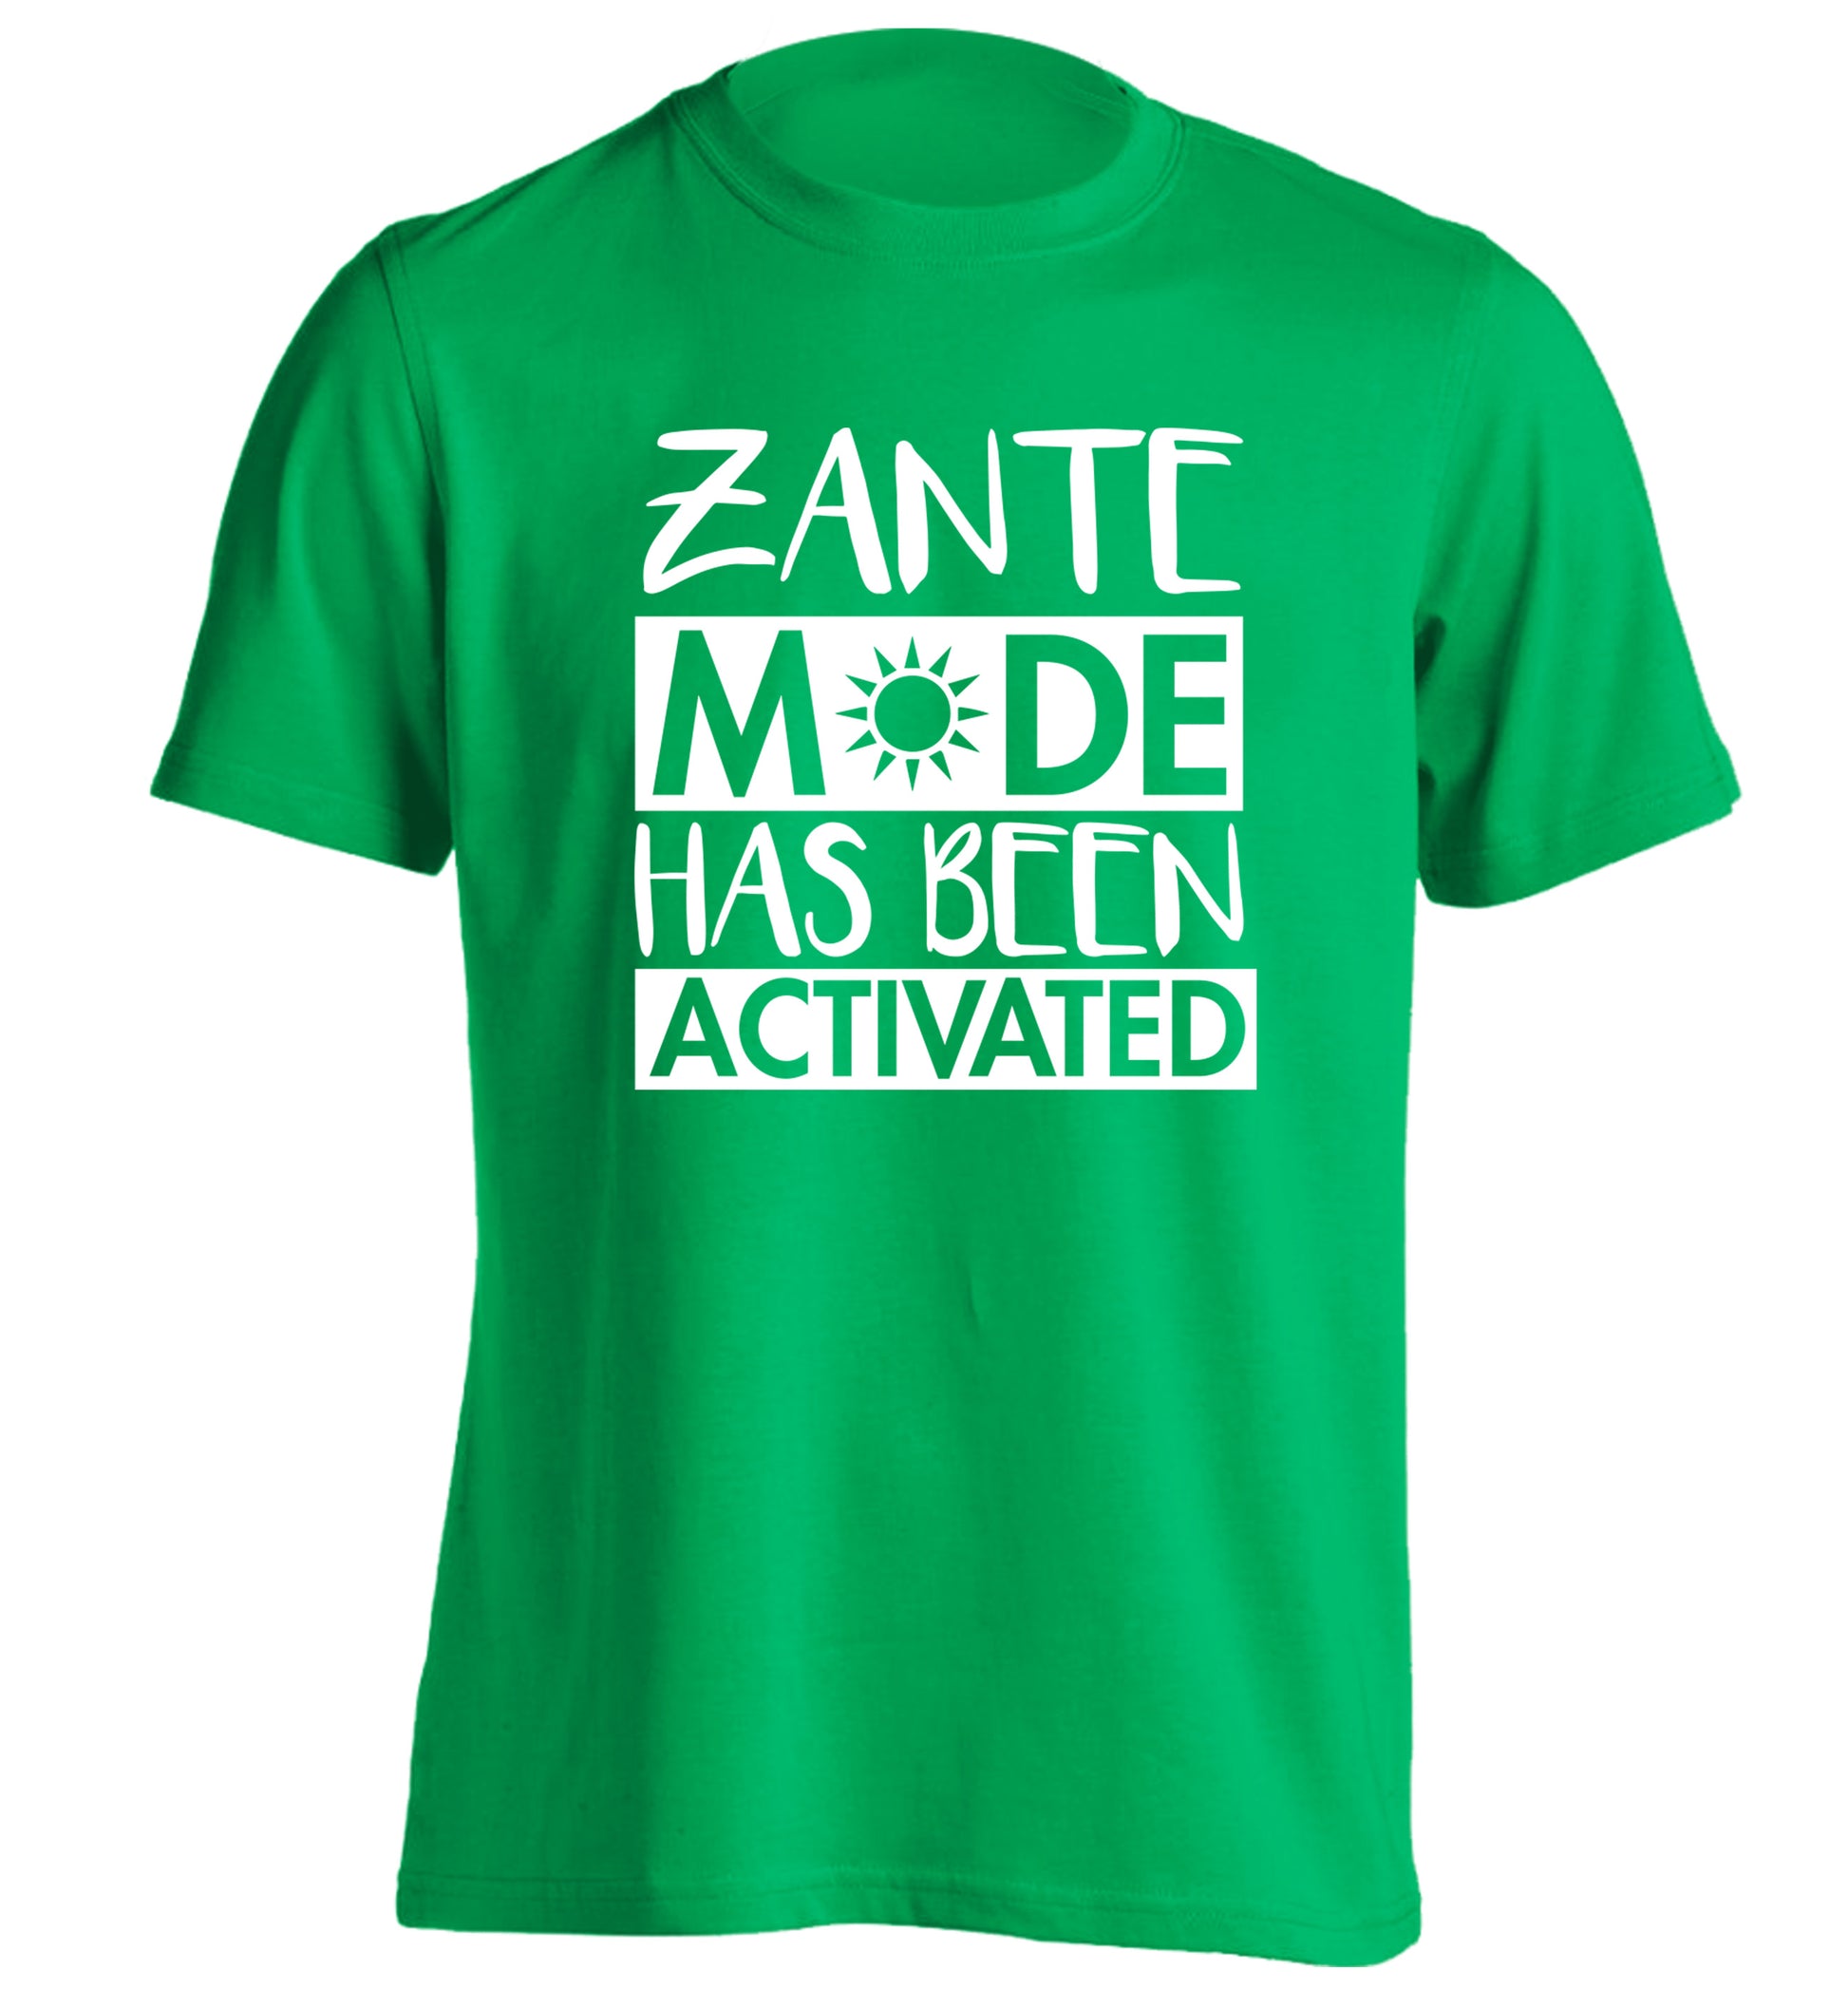 Zante mode has been activated adults unisex green Tshirt 2XL